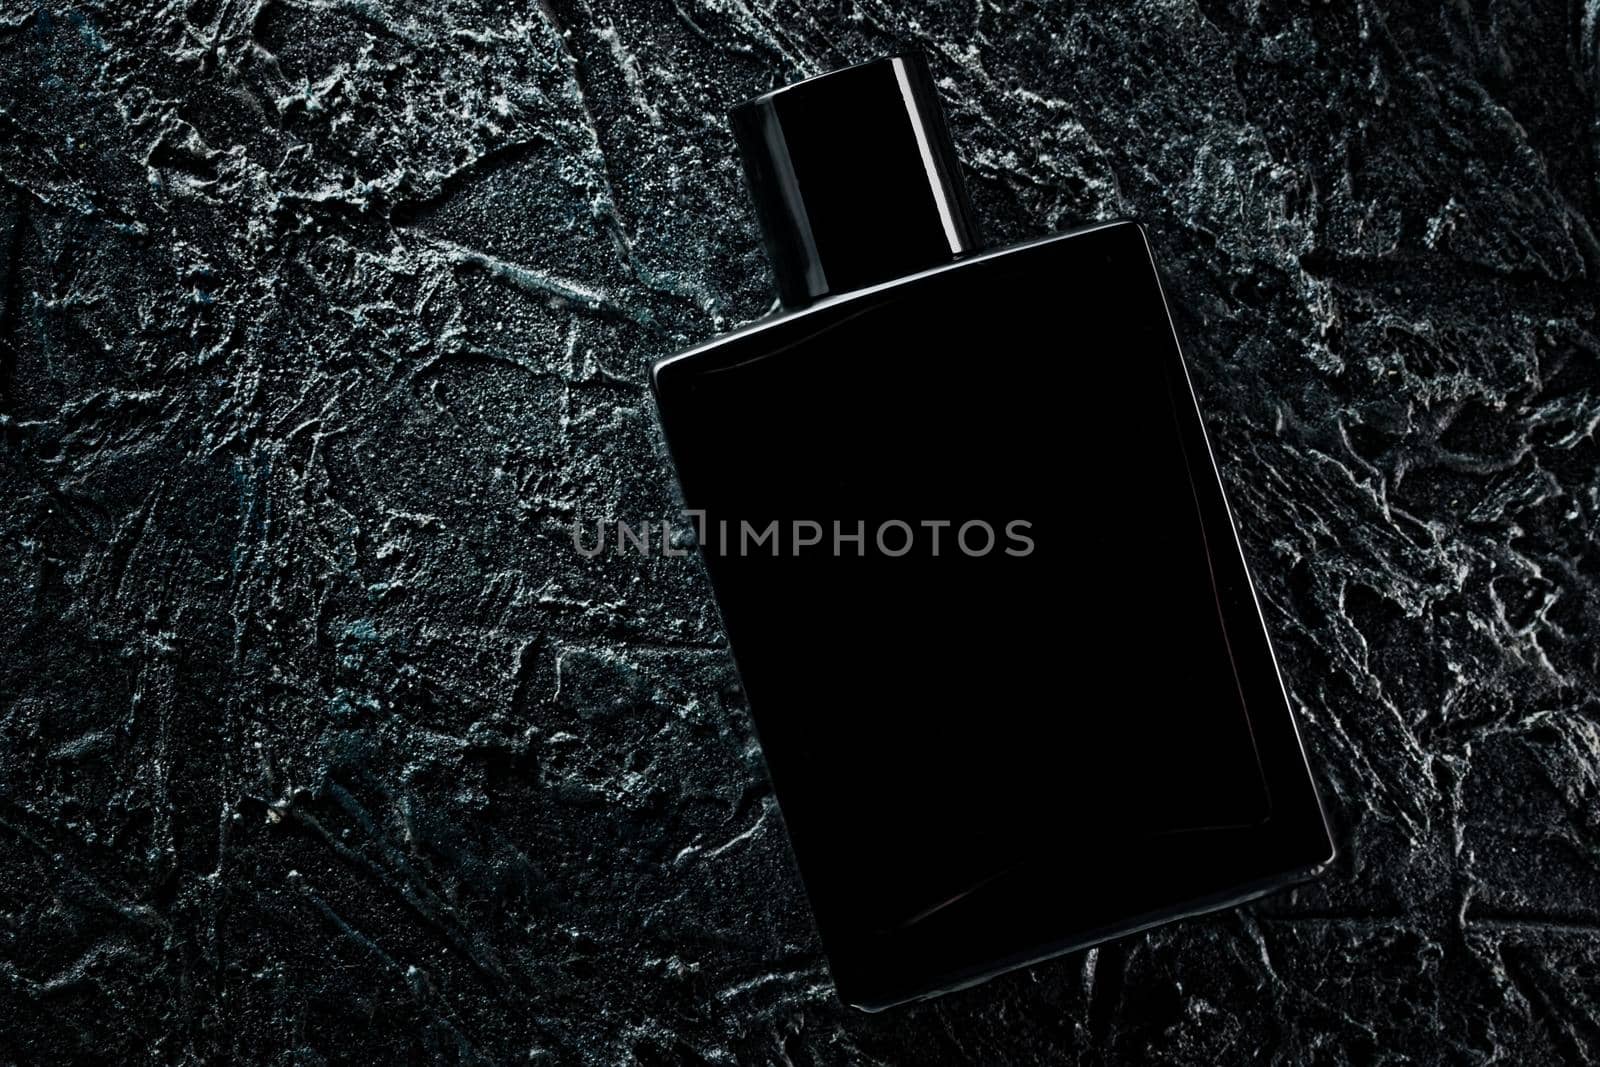 Men's fragrance of perfume or eau de toilette. Promotional photo of a black bottle on a dark background. Layout for copying text.